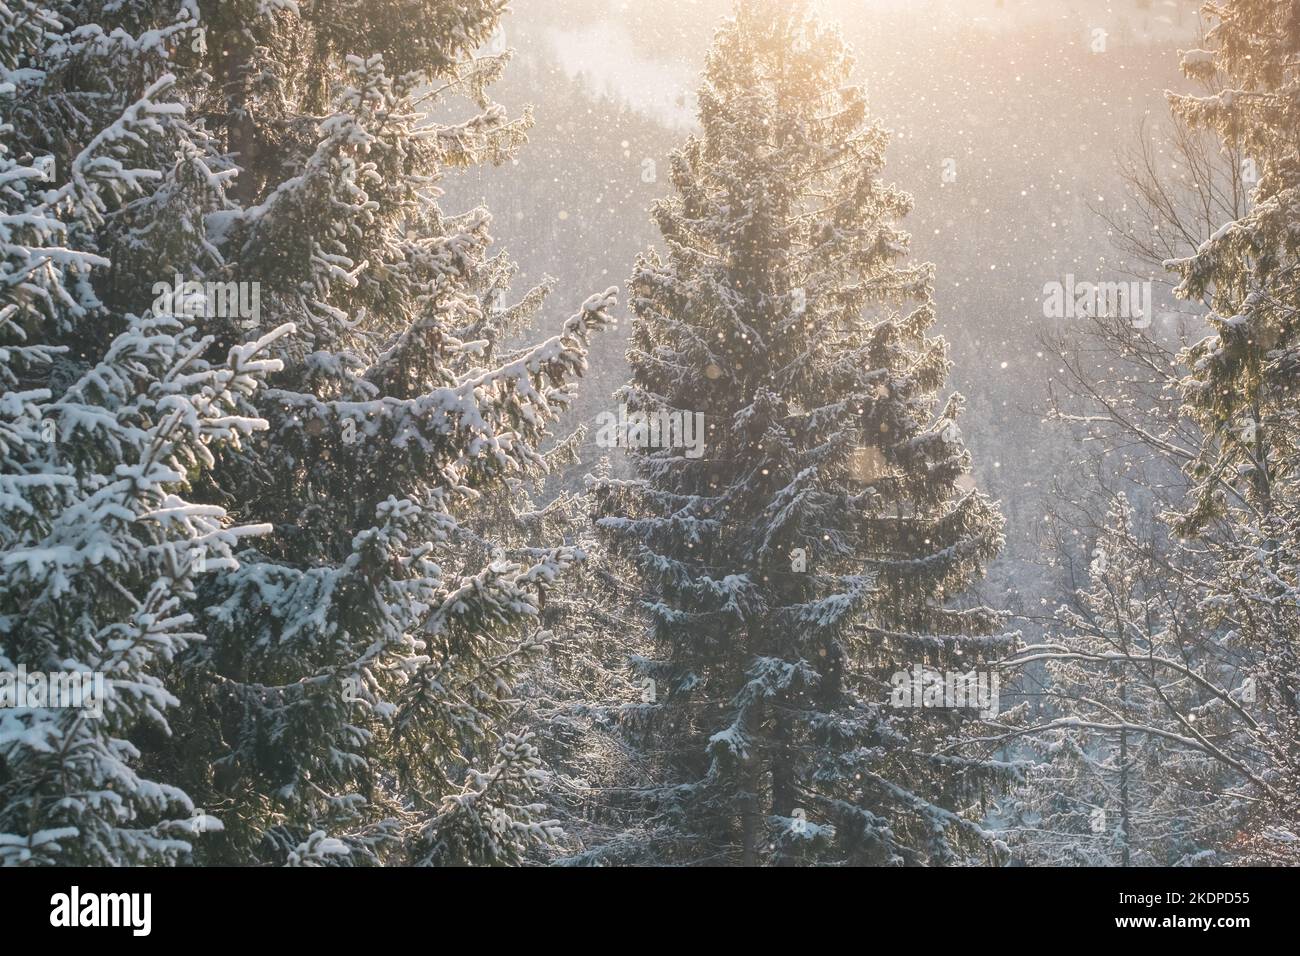 Beautiful winter scenery with snow falling in spruce forest at sunset Stock Photo